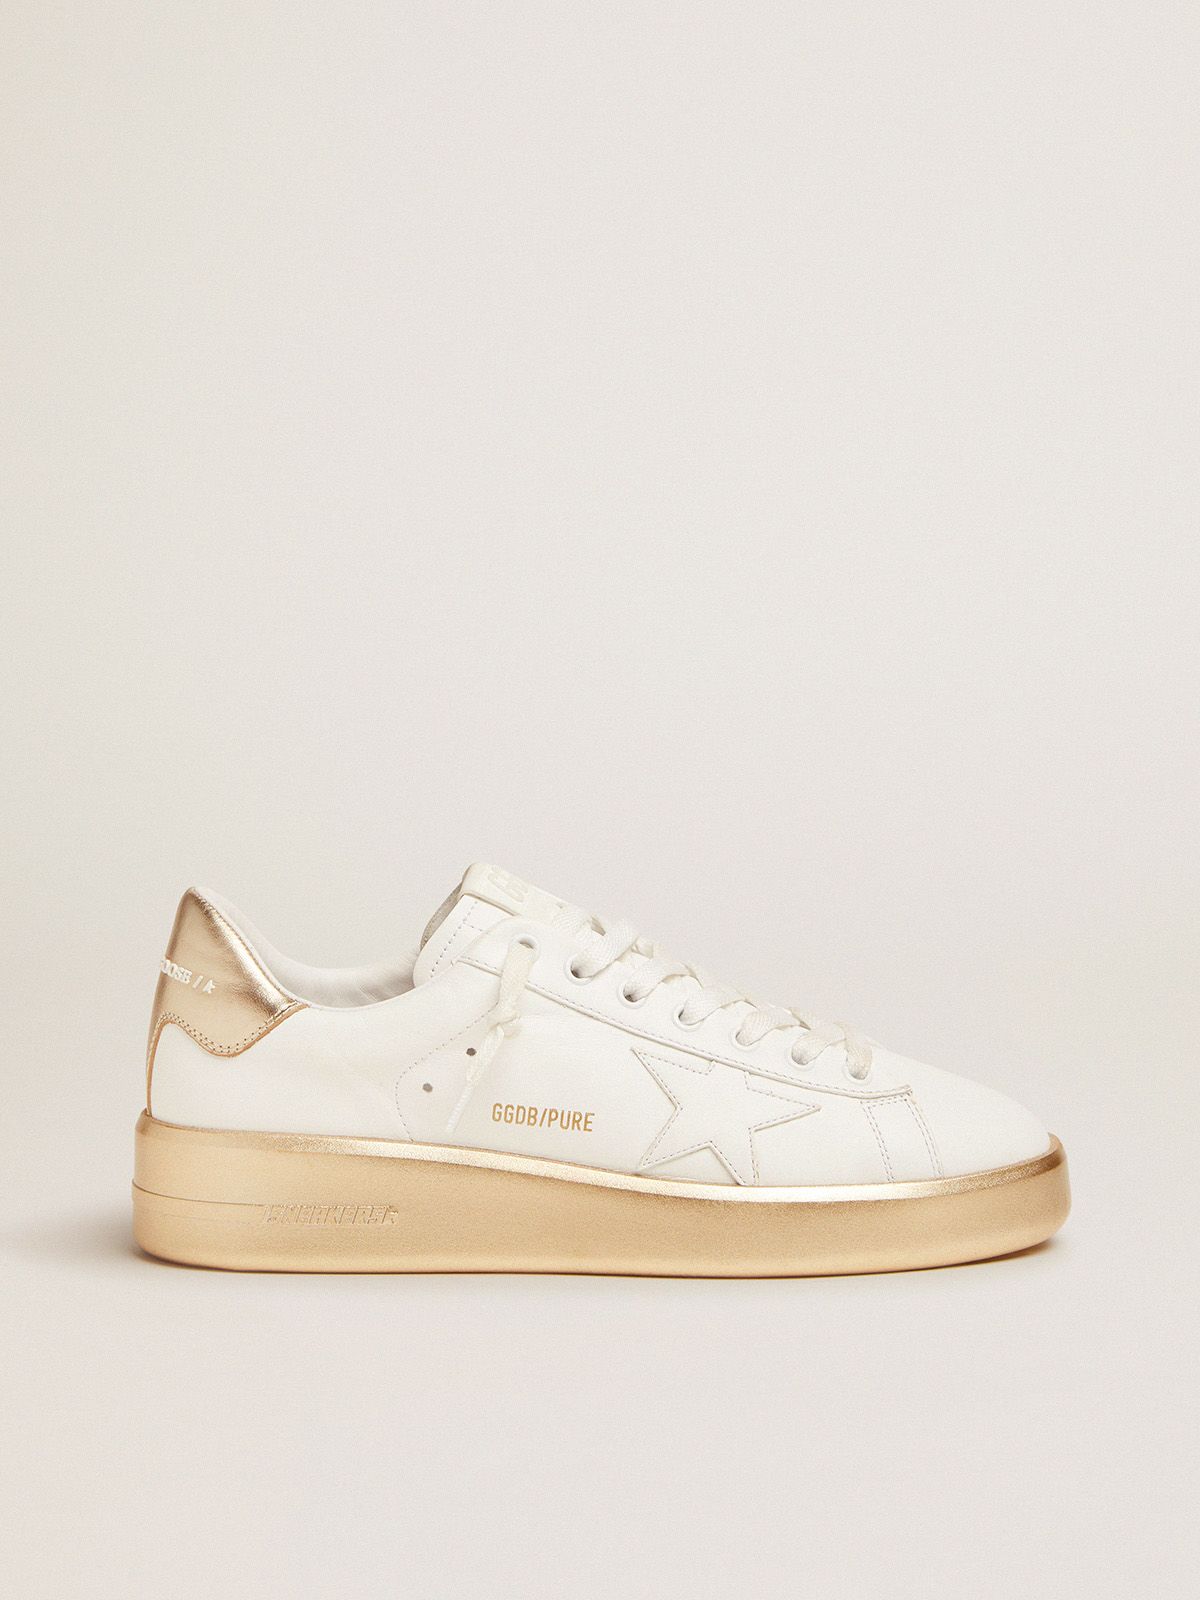 golden goose white gold laminated with foxing heel in sneakers and leather Purestar tab